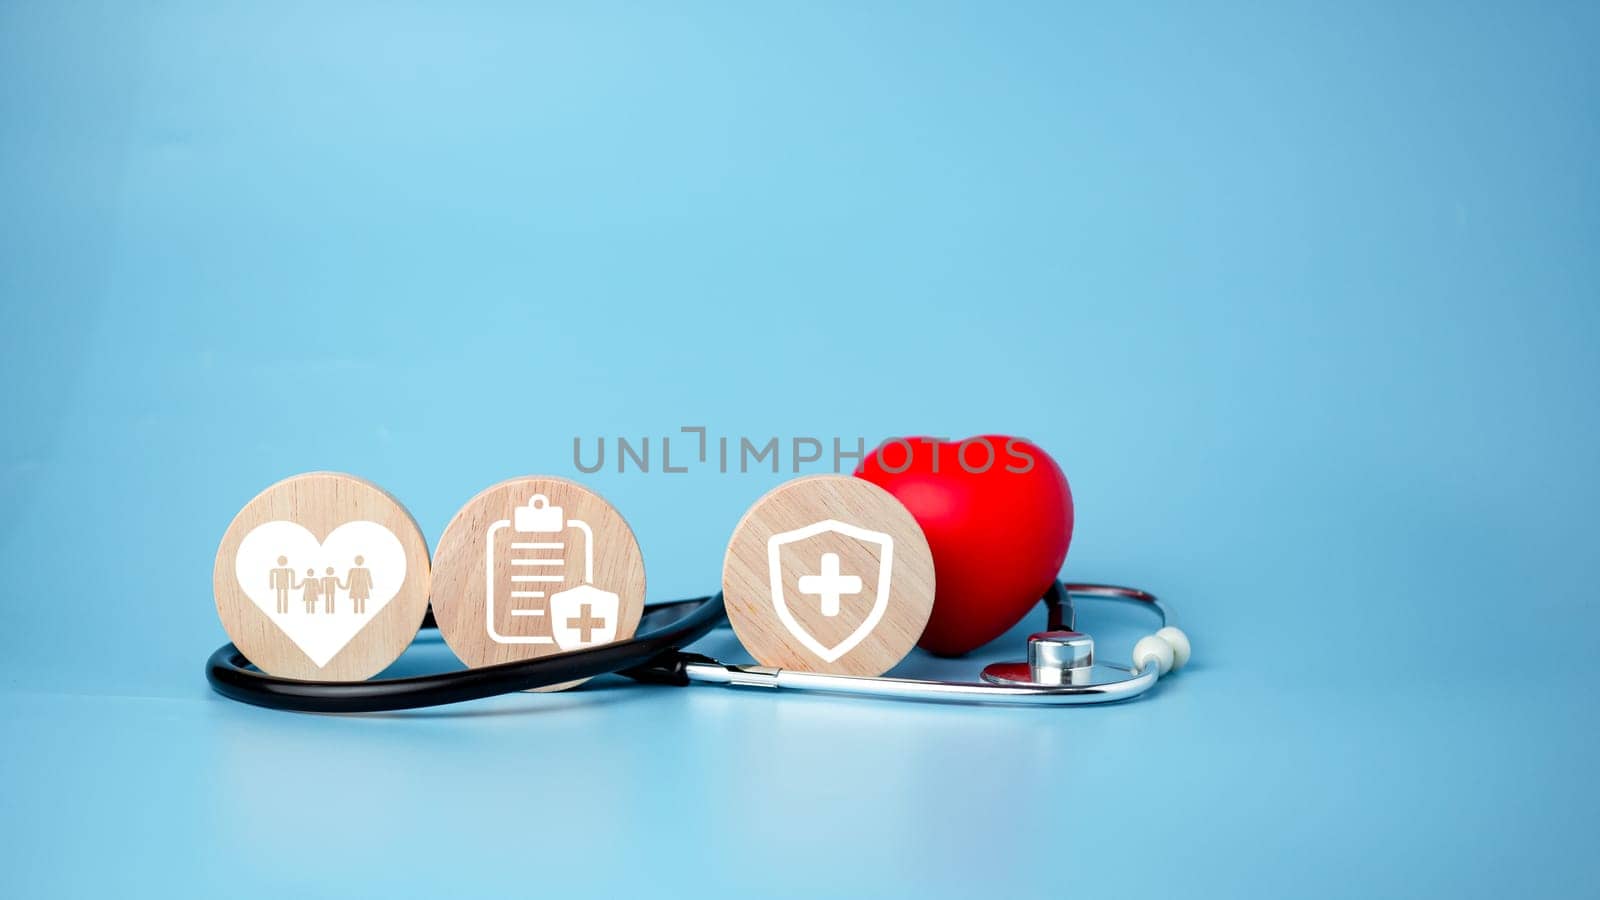 The concept of health insurance and medical welfare. Circle wood and red heart with icon. Health insurance and access to health care.  by Unimages2527